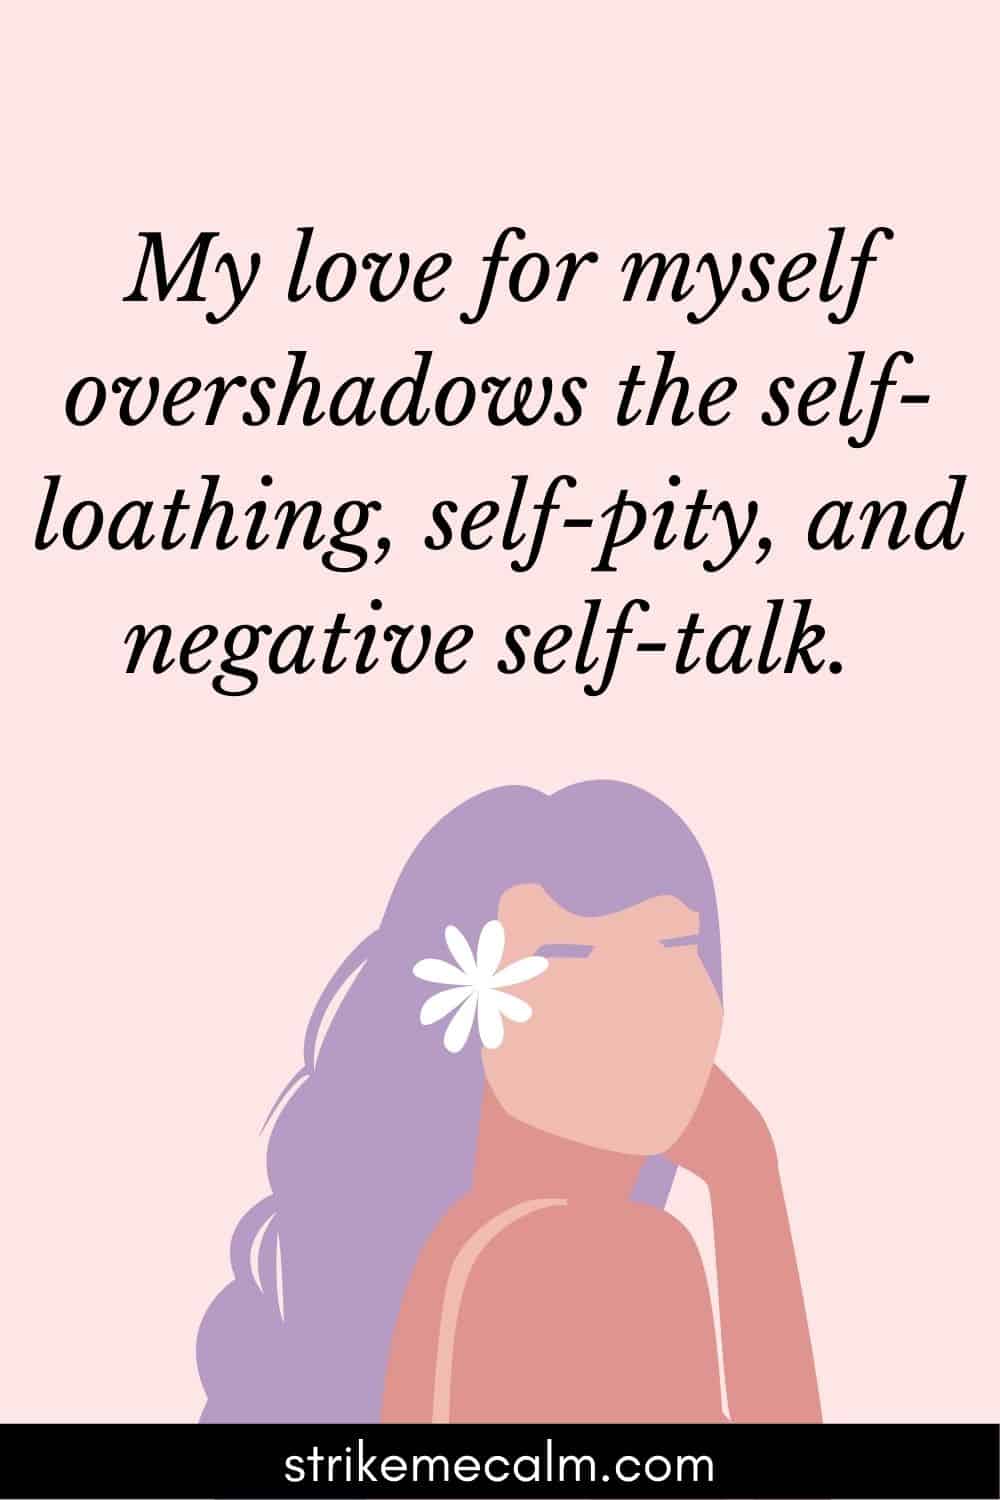 66 Beautiful Self-Love Affirmations to Boost Your Self-Worth